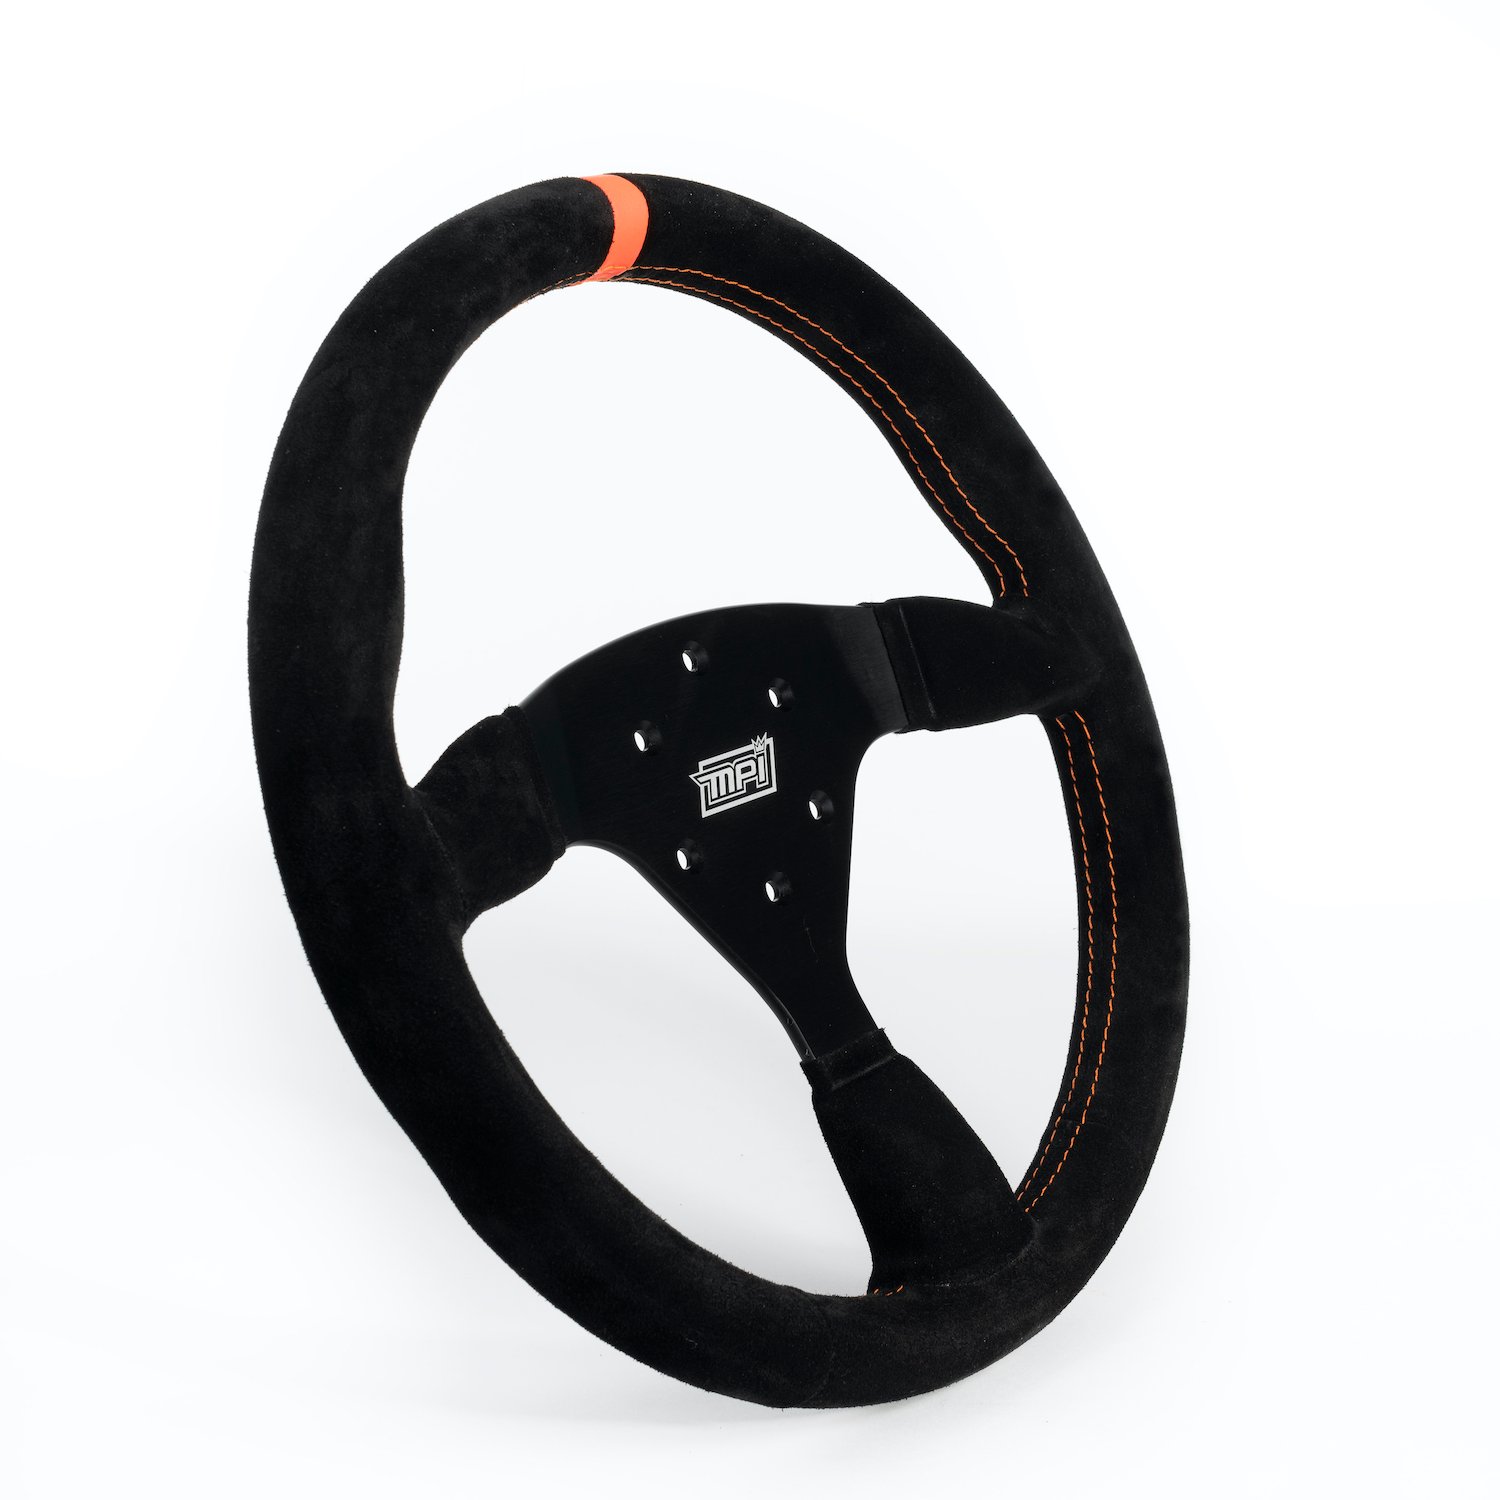 Road Course / Track Day Steering Wheel 14